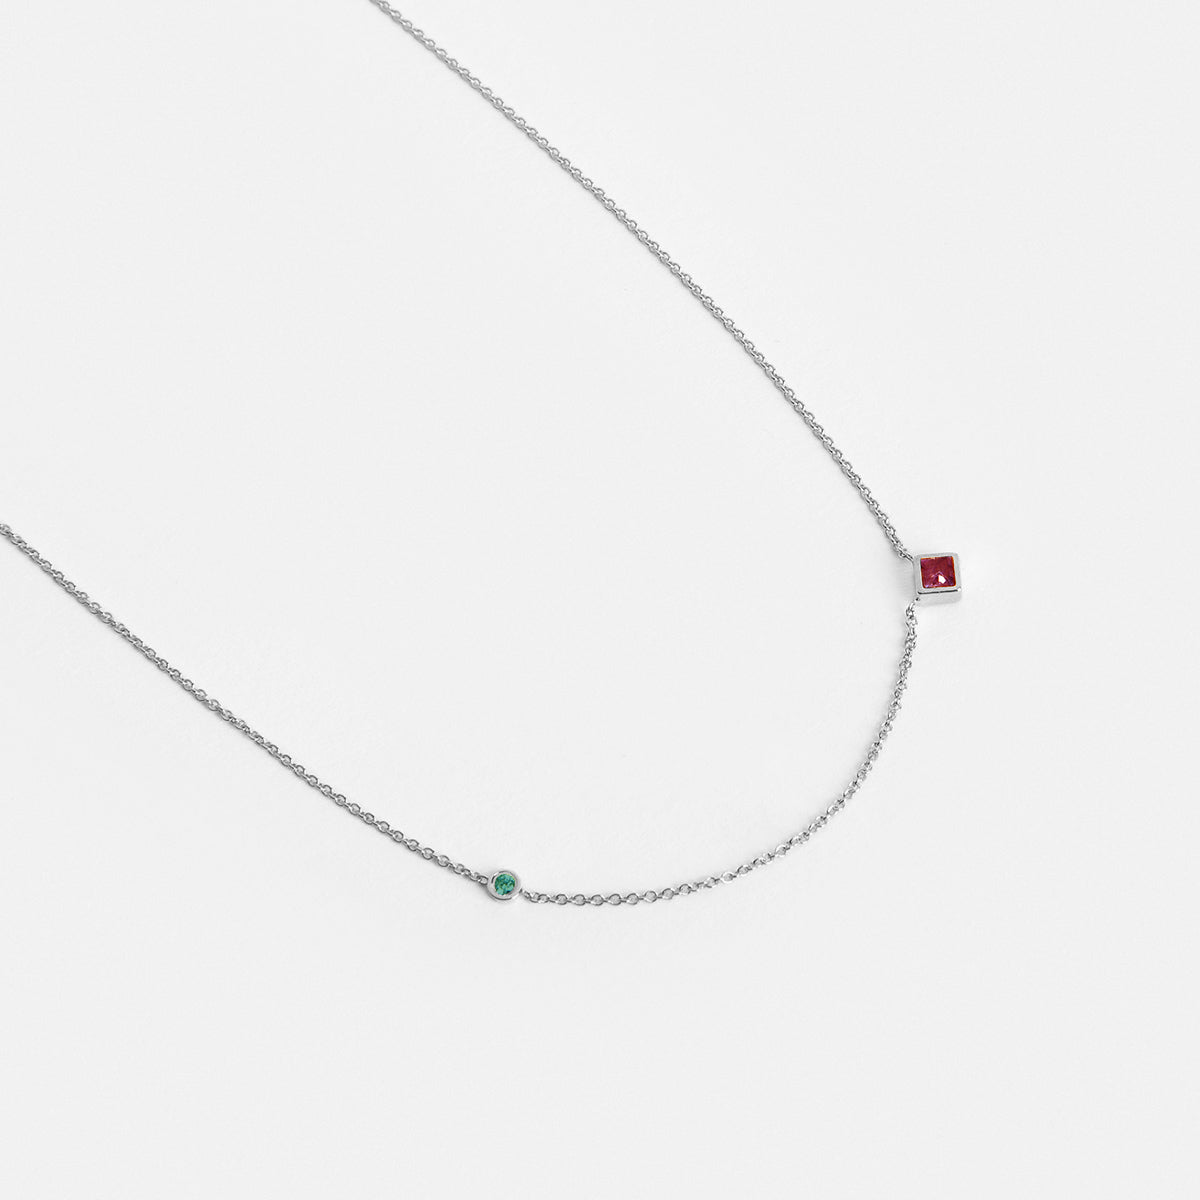 Isu Unique Necklace in 14k White Gold set with Emerald and Ruby By SHW Fine Jewelry NYC